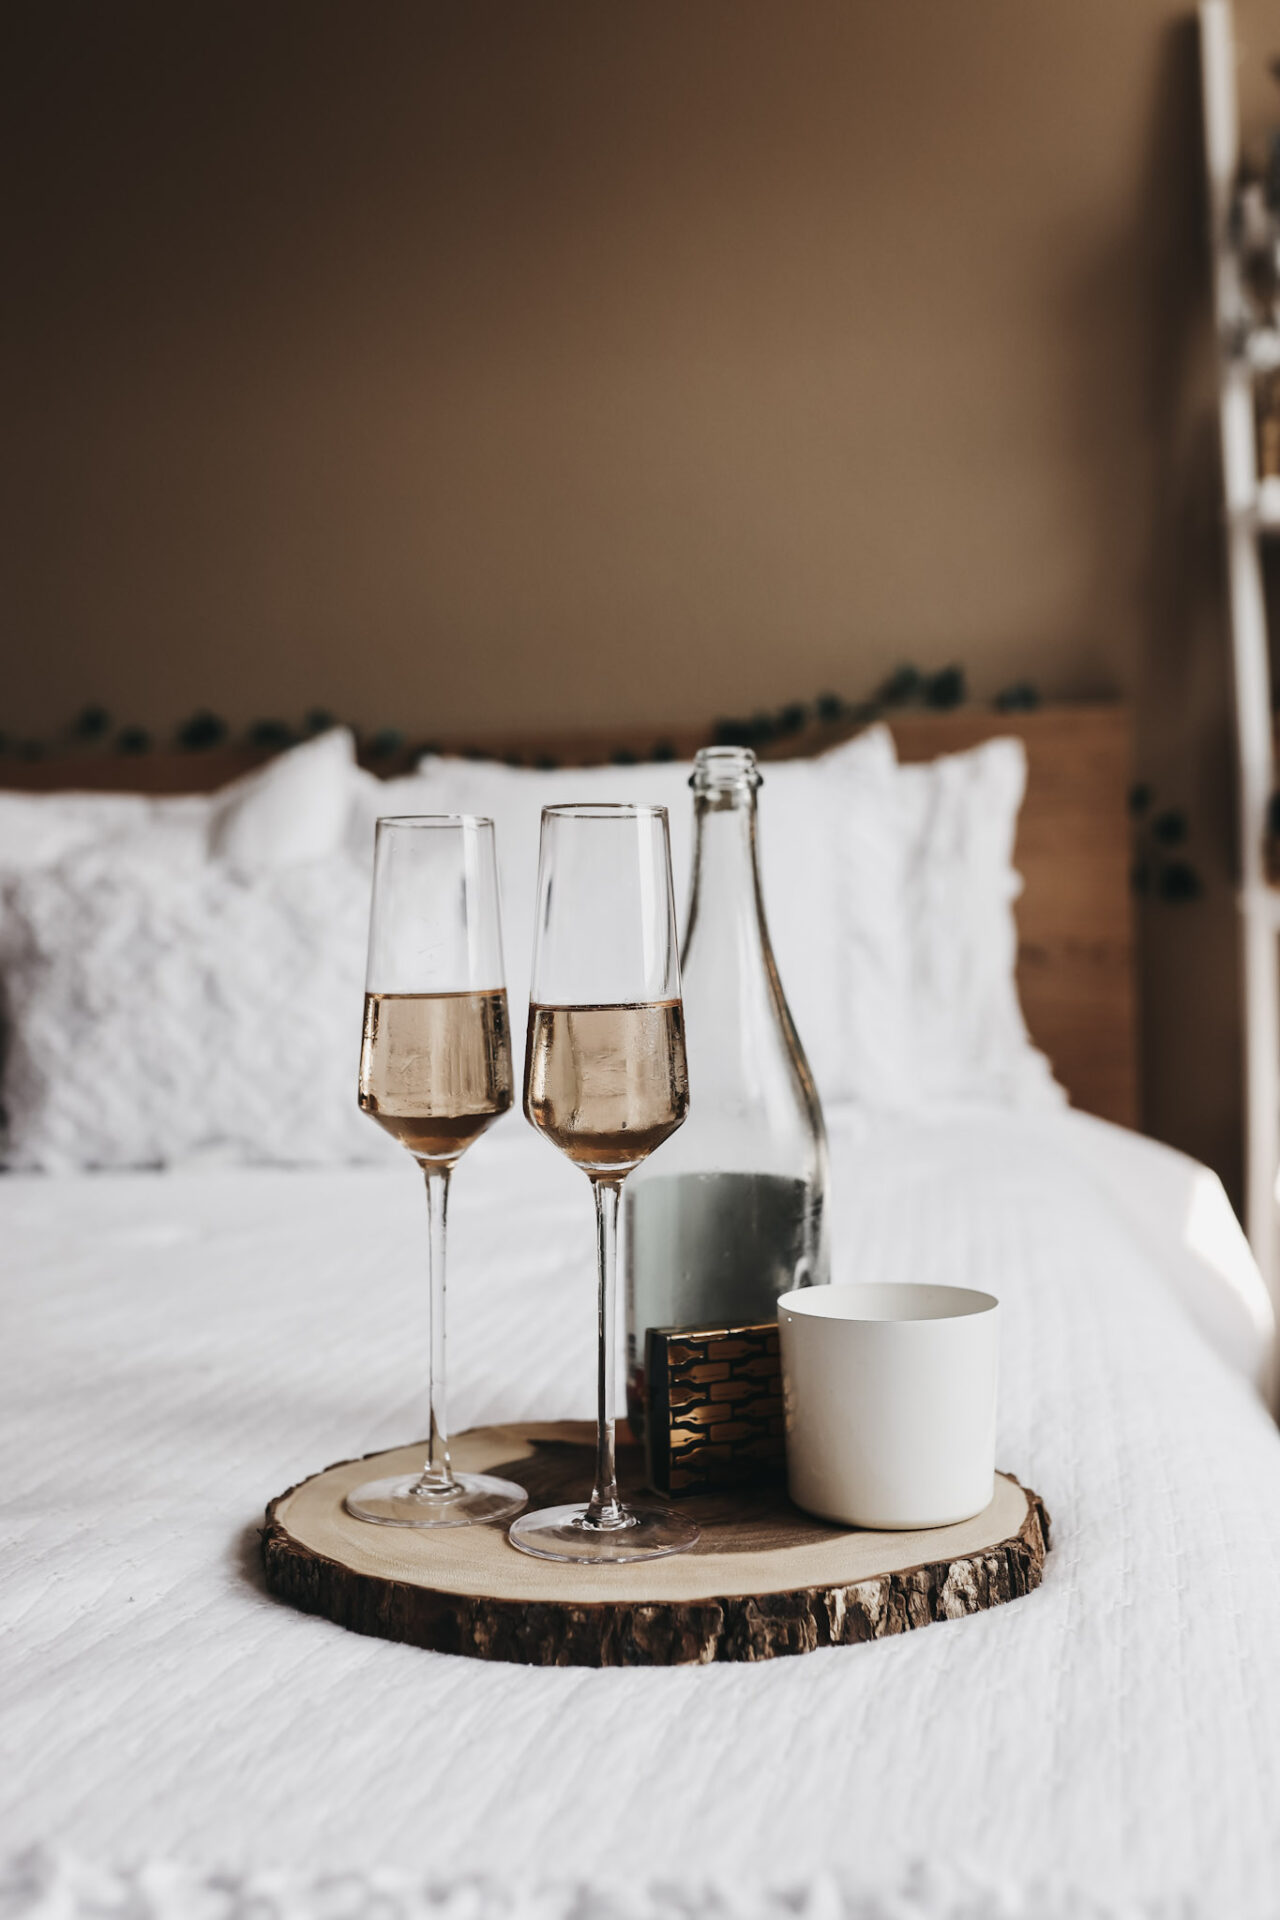 Blanc de blanc sparkling wine on a try with a wine bottle and candle on a white bed spread